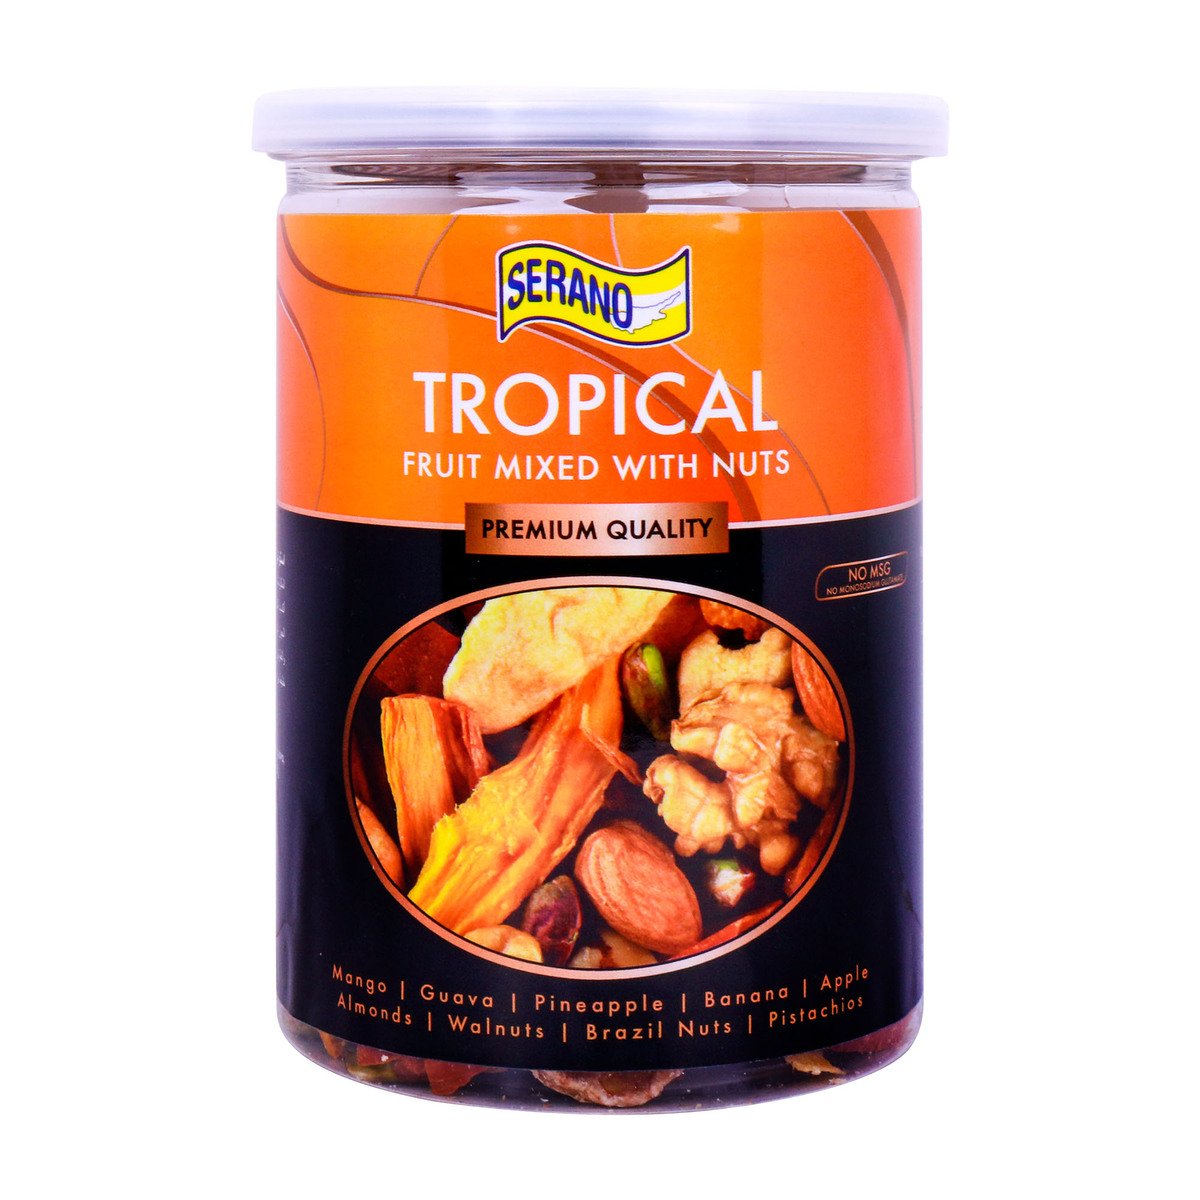 Serano Tropical Fruit Mixed With Nuts 280g